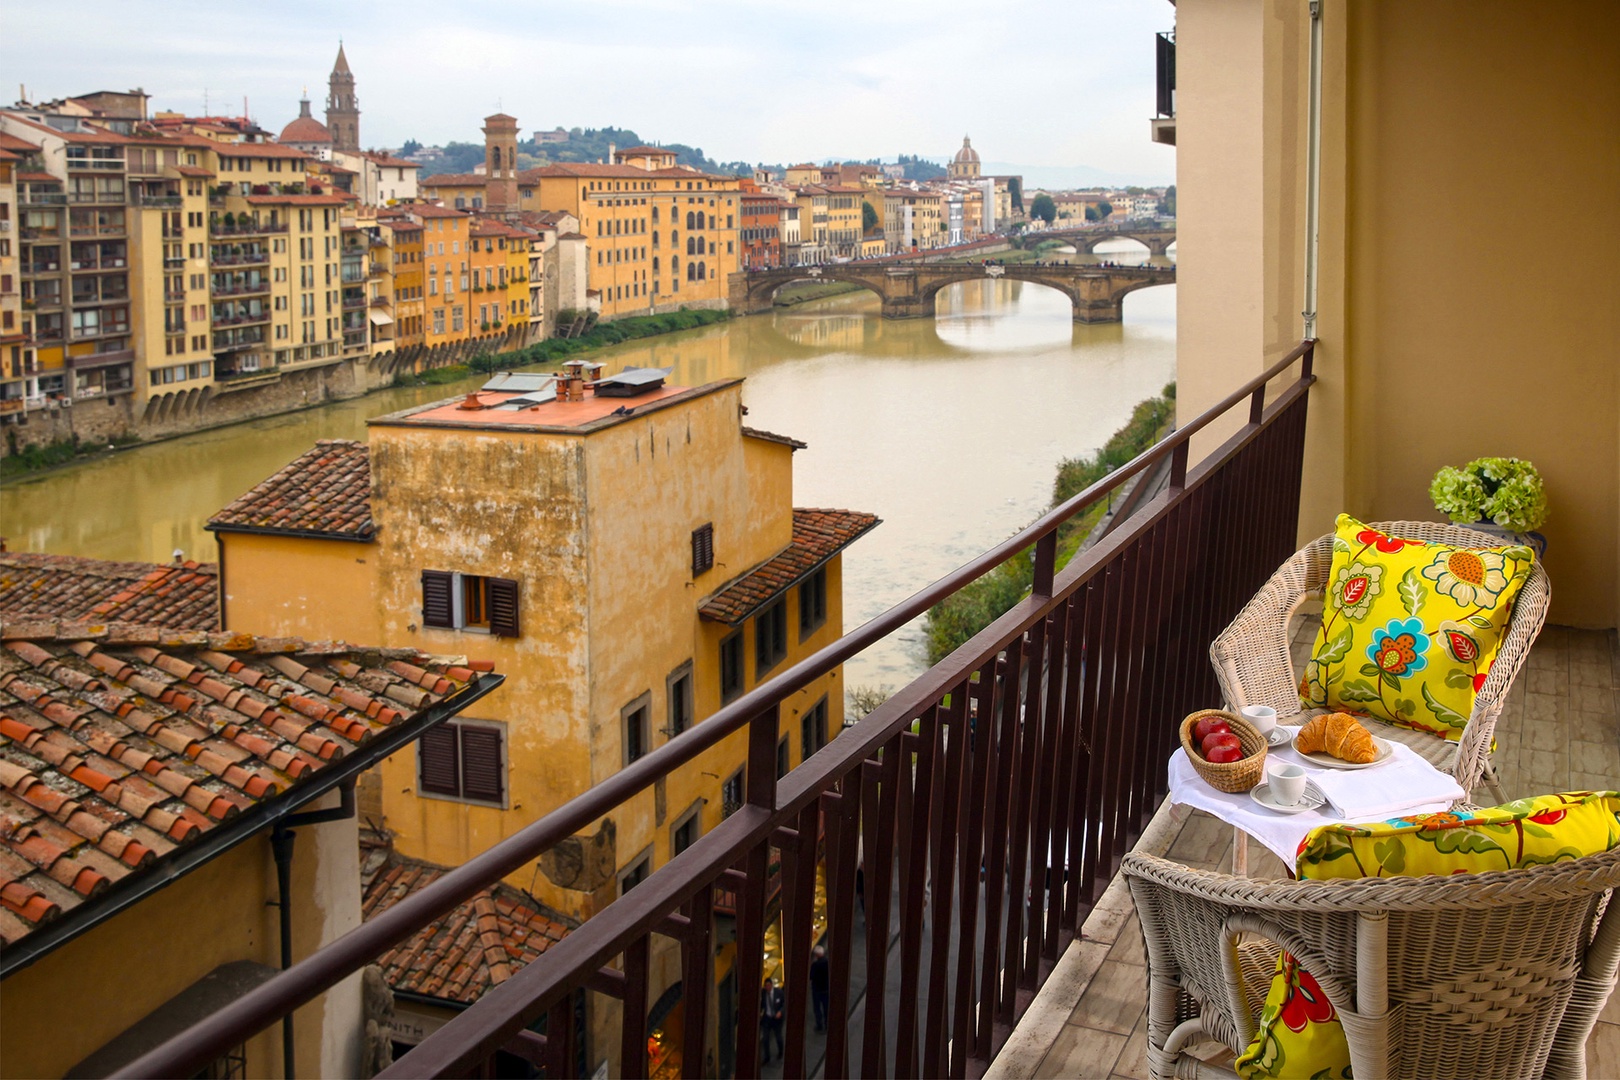 Step out onto the terrace and drink in the views. The narrow terrace has a table and two chairs.